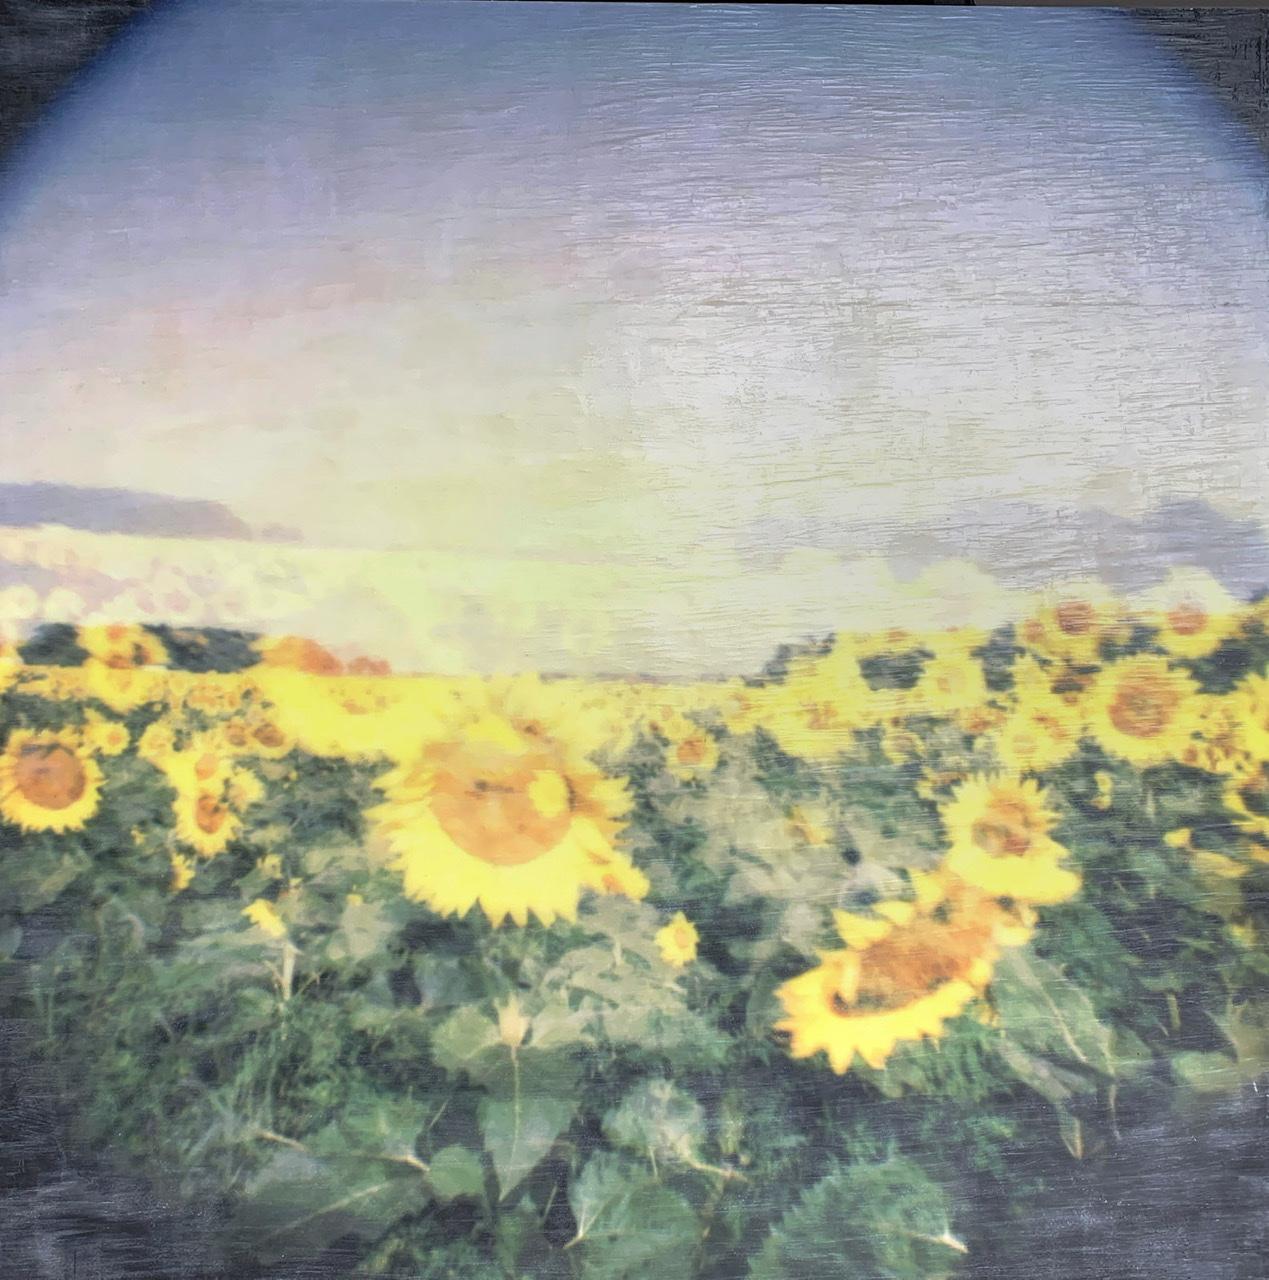 Shawn Ehlers Landscape Photograph - "Ode to the Sun", Summer beauty. Encaustic wax & polaroid on wood board. 